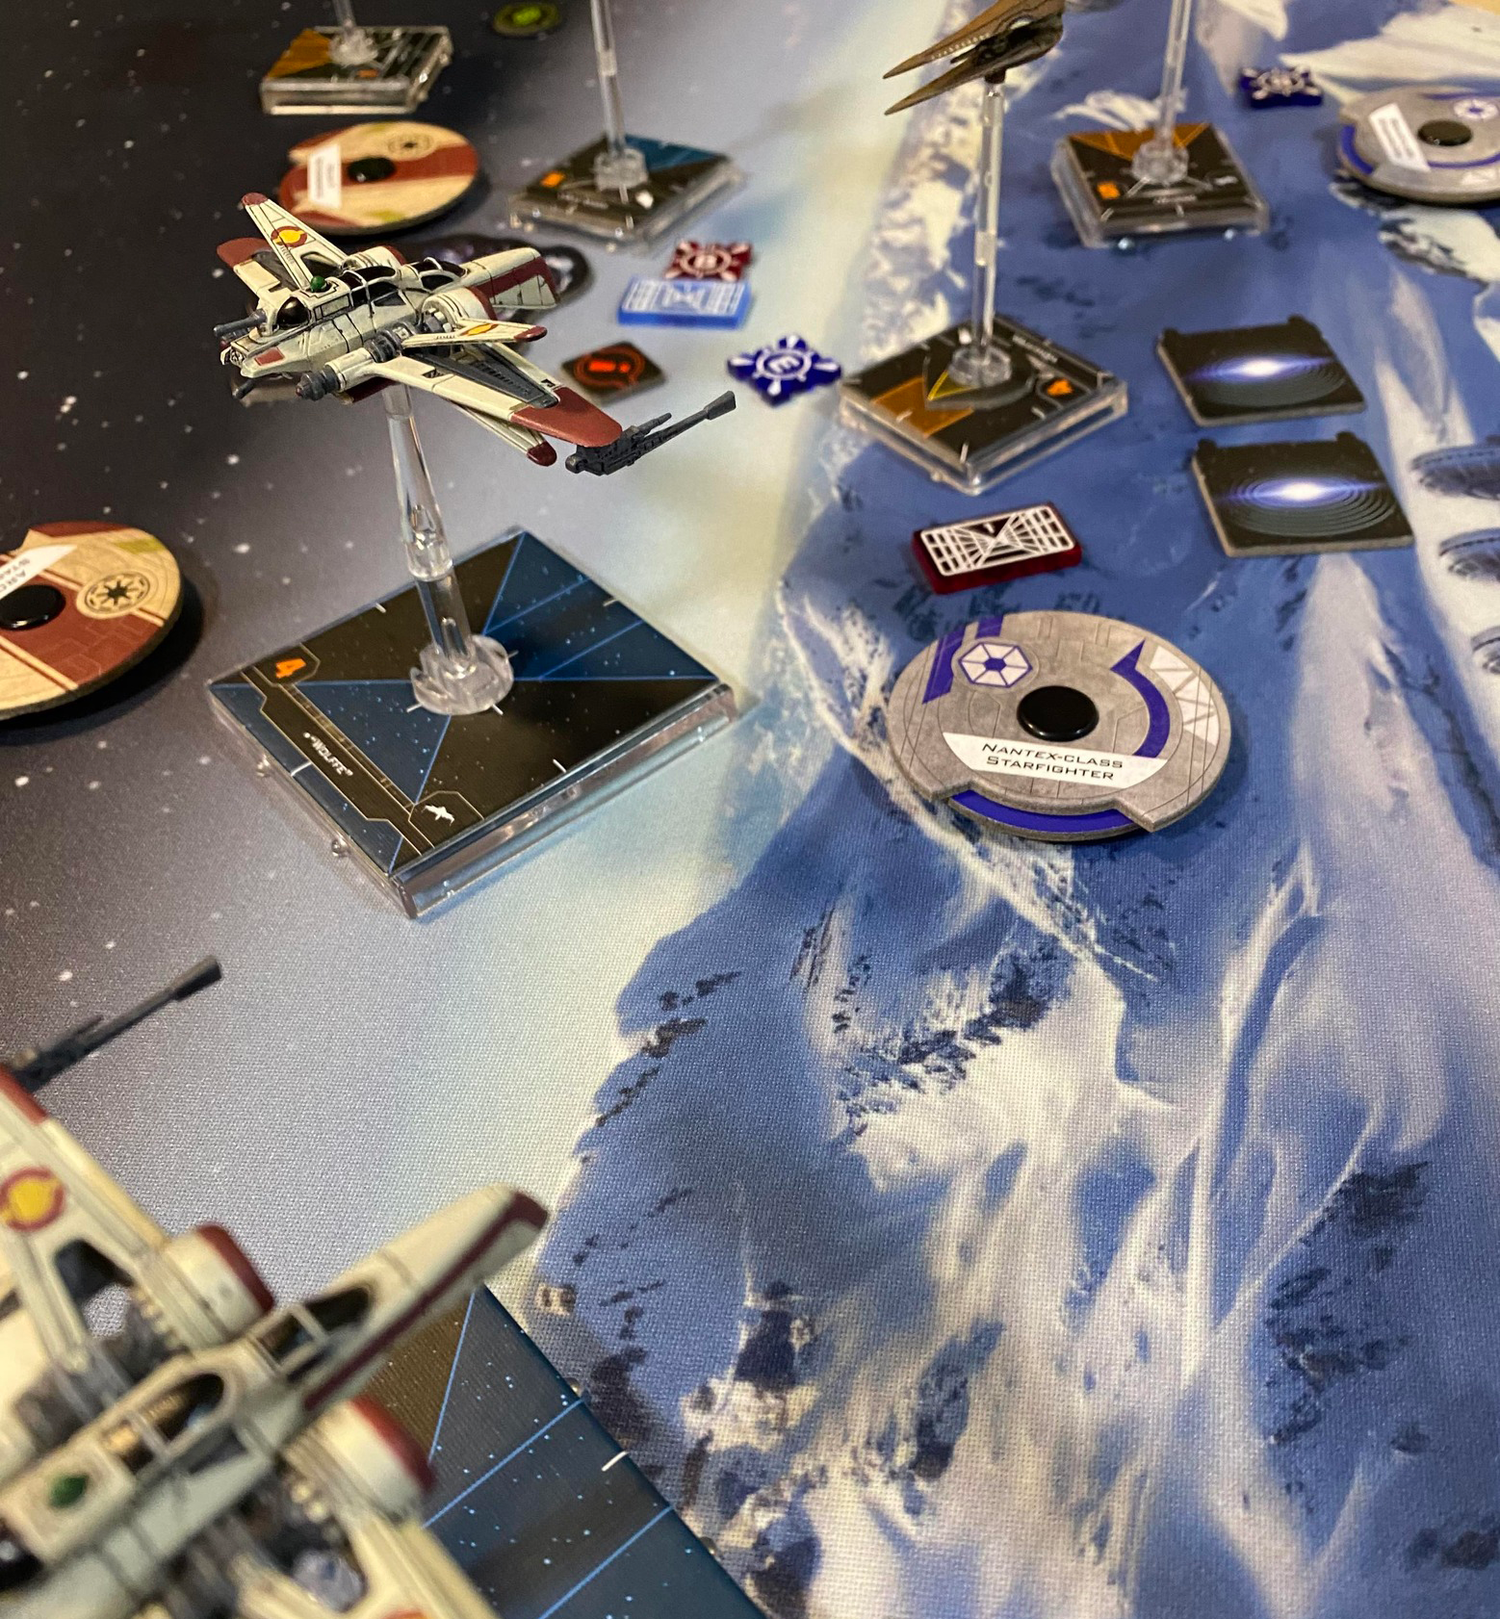 A close up of a game of the Star Wars X-wing Miniatures game  being plated at Happy Piranha café on a winter themed gaming mat.